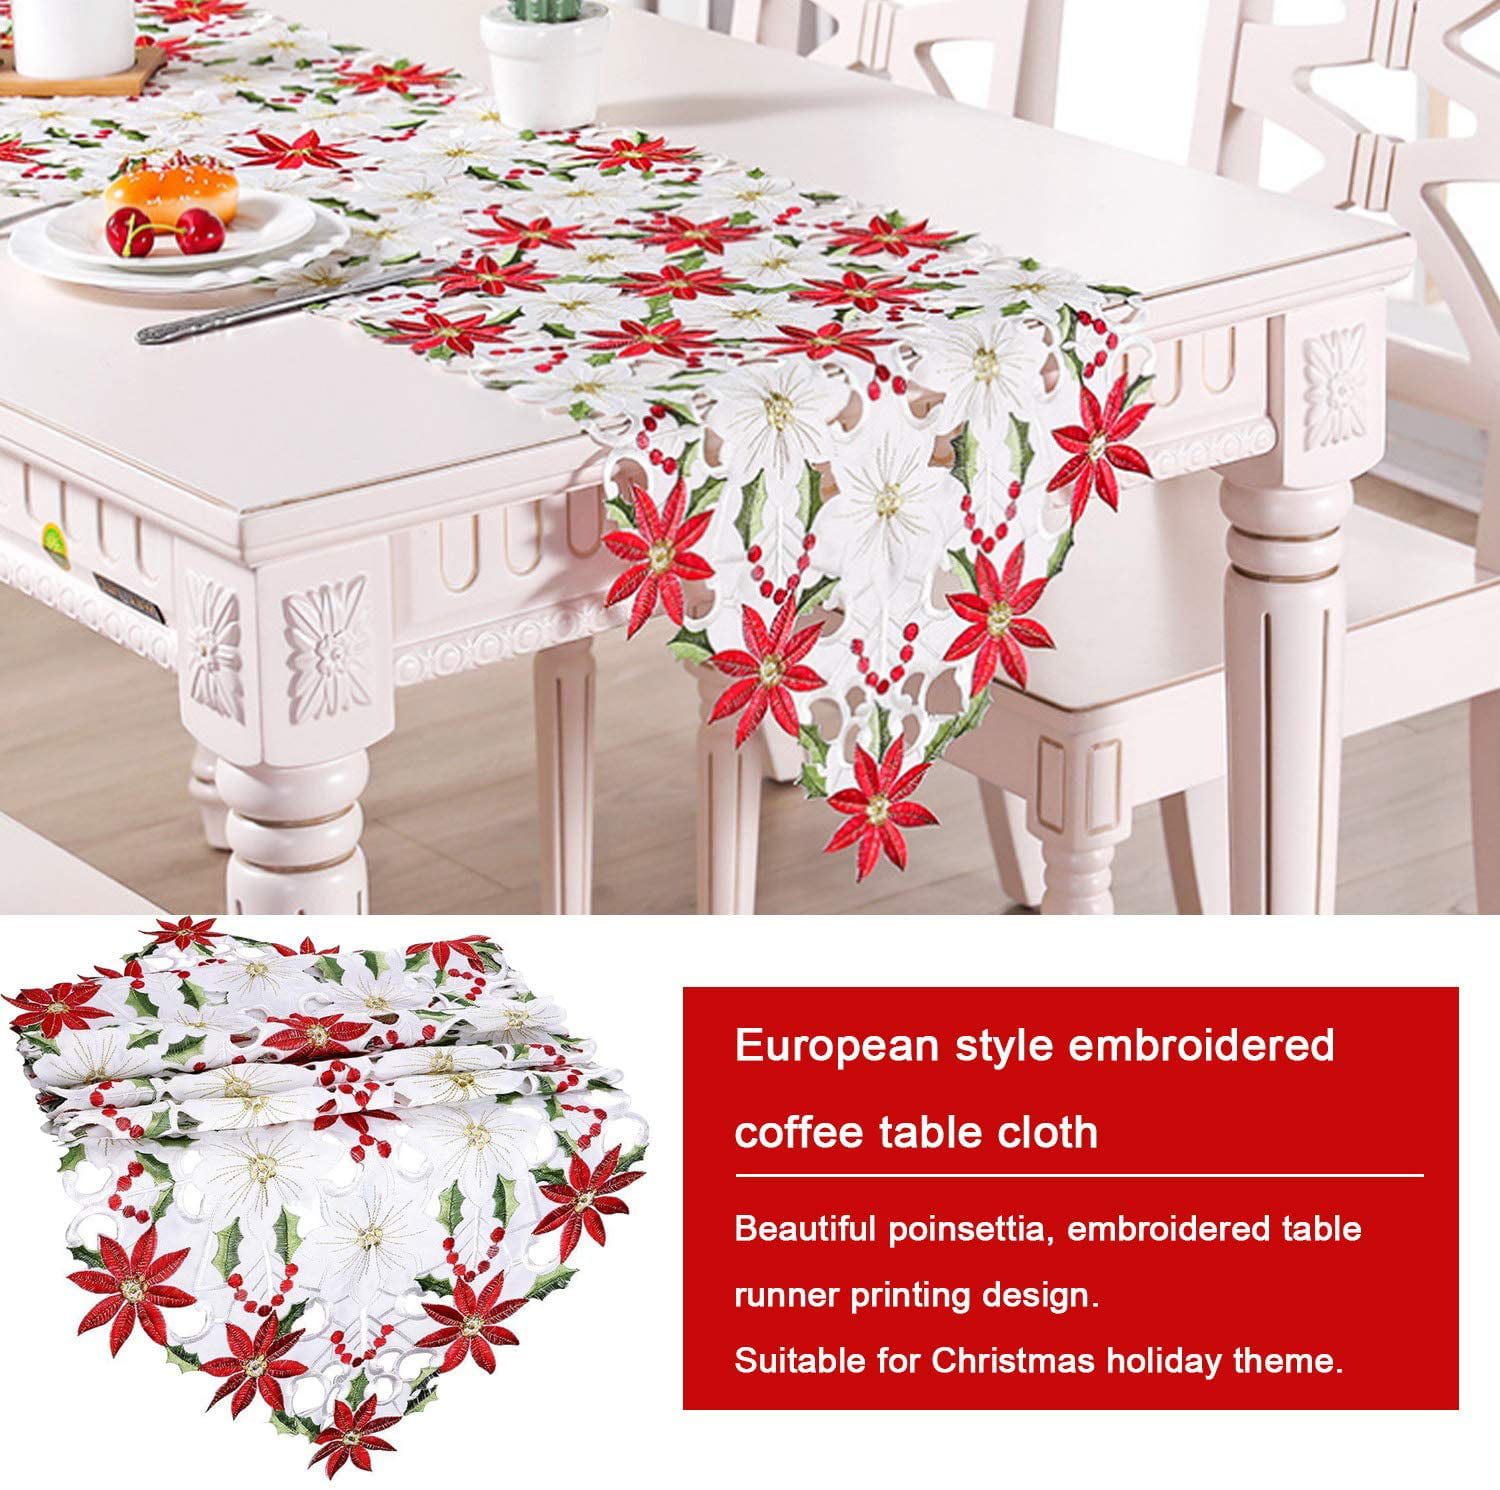 Hollow Out Table Runner with Poinsettia Flowers 70 x 15 Inch Christmas Poinsettia Table Runner for Table Decorations Aytai Embroided Table Runners Christmas Table Runners 